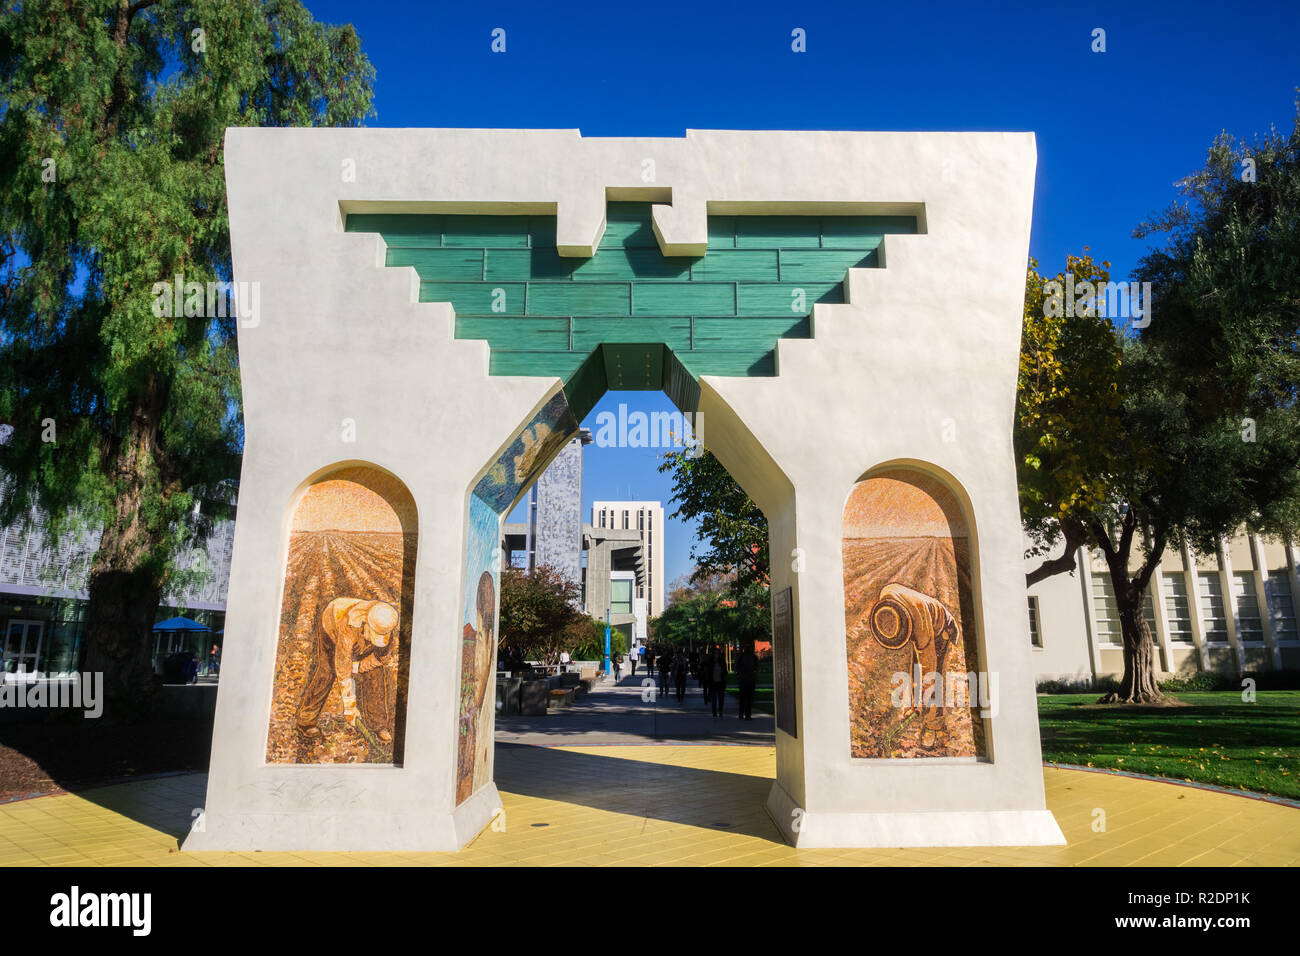 San Jose, California / USA - December 6, 2017 - Arch of Dignity, Equality and Justice on the grounds of San Jose State University, San Francisco bay a Stock Photo